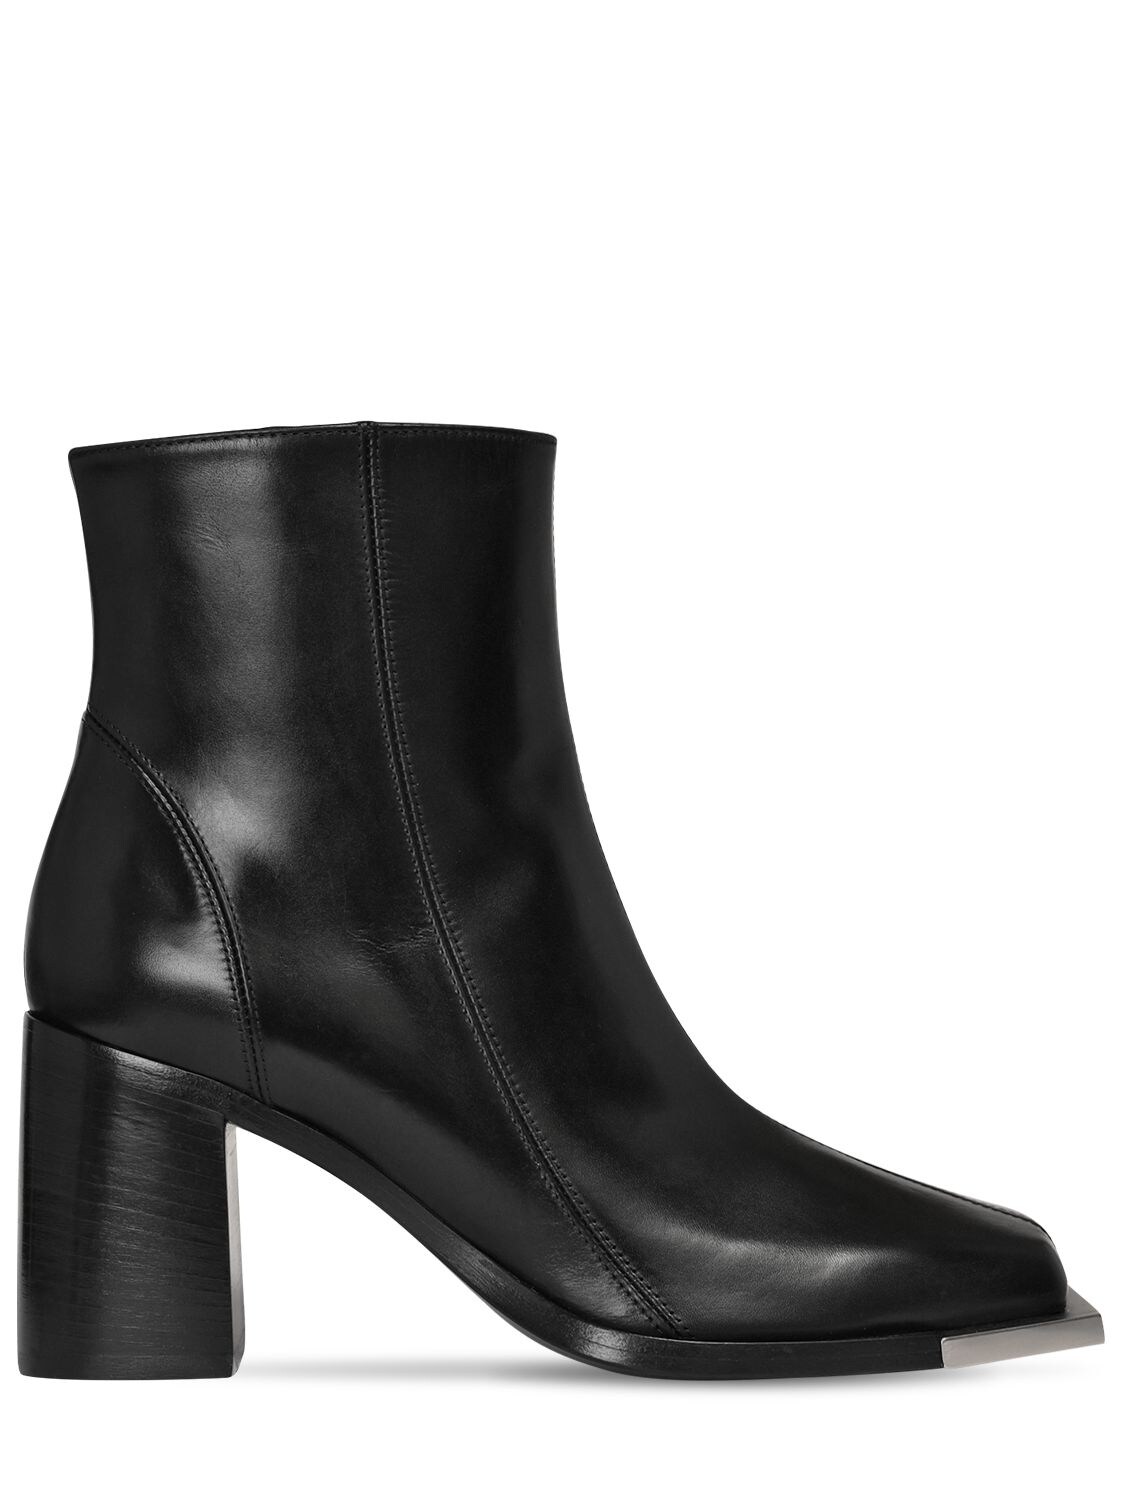 PETER DO 85MM LEATHER ANKLE BOOTS,72IKOX030-QKXBQ0S1